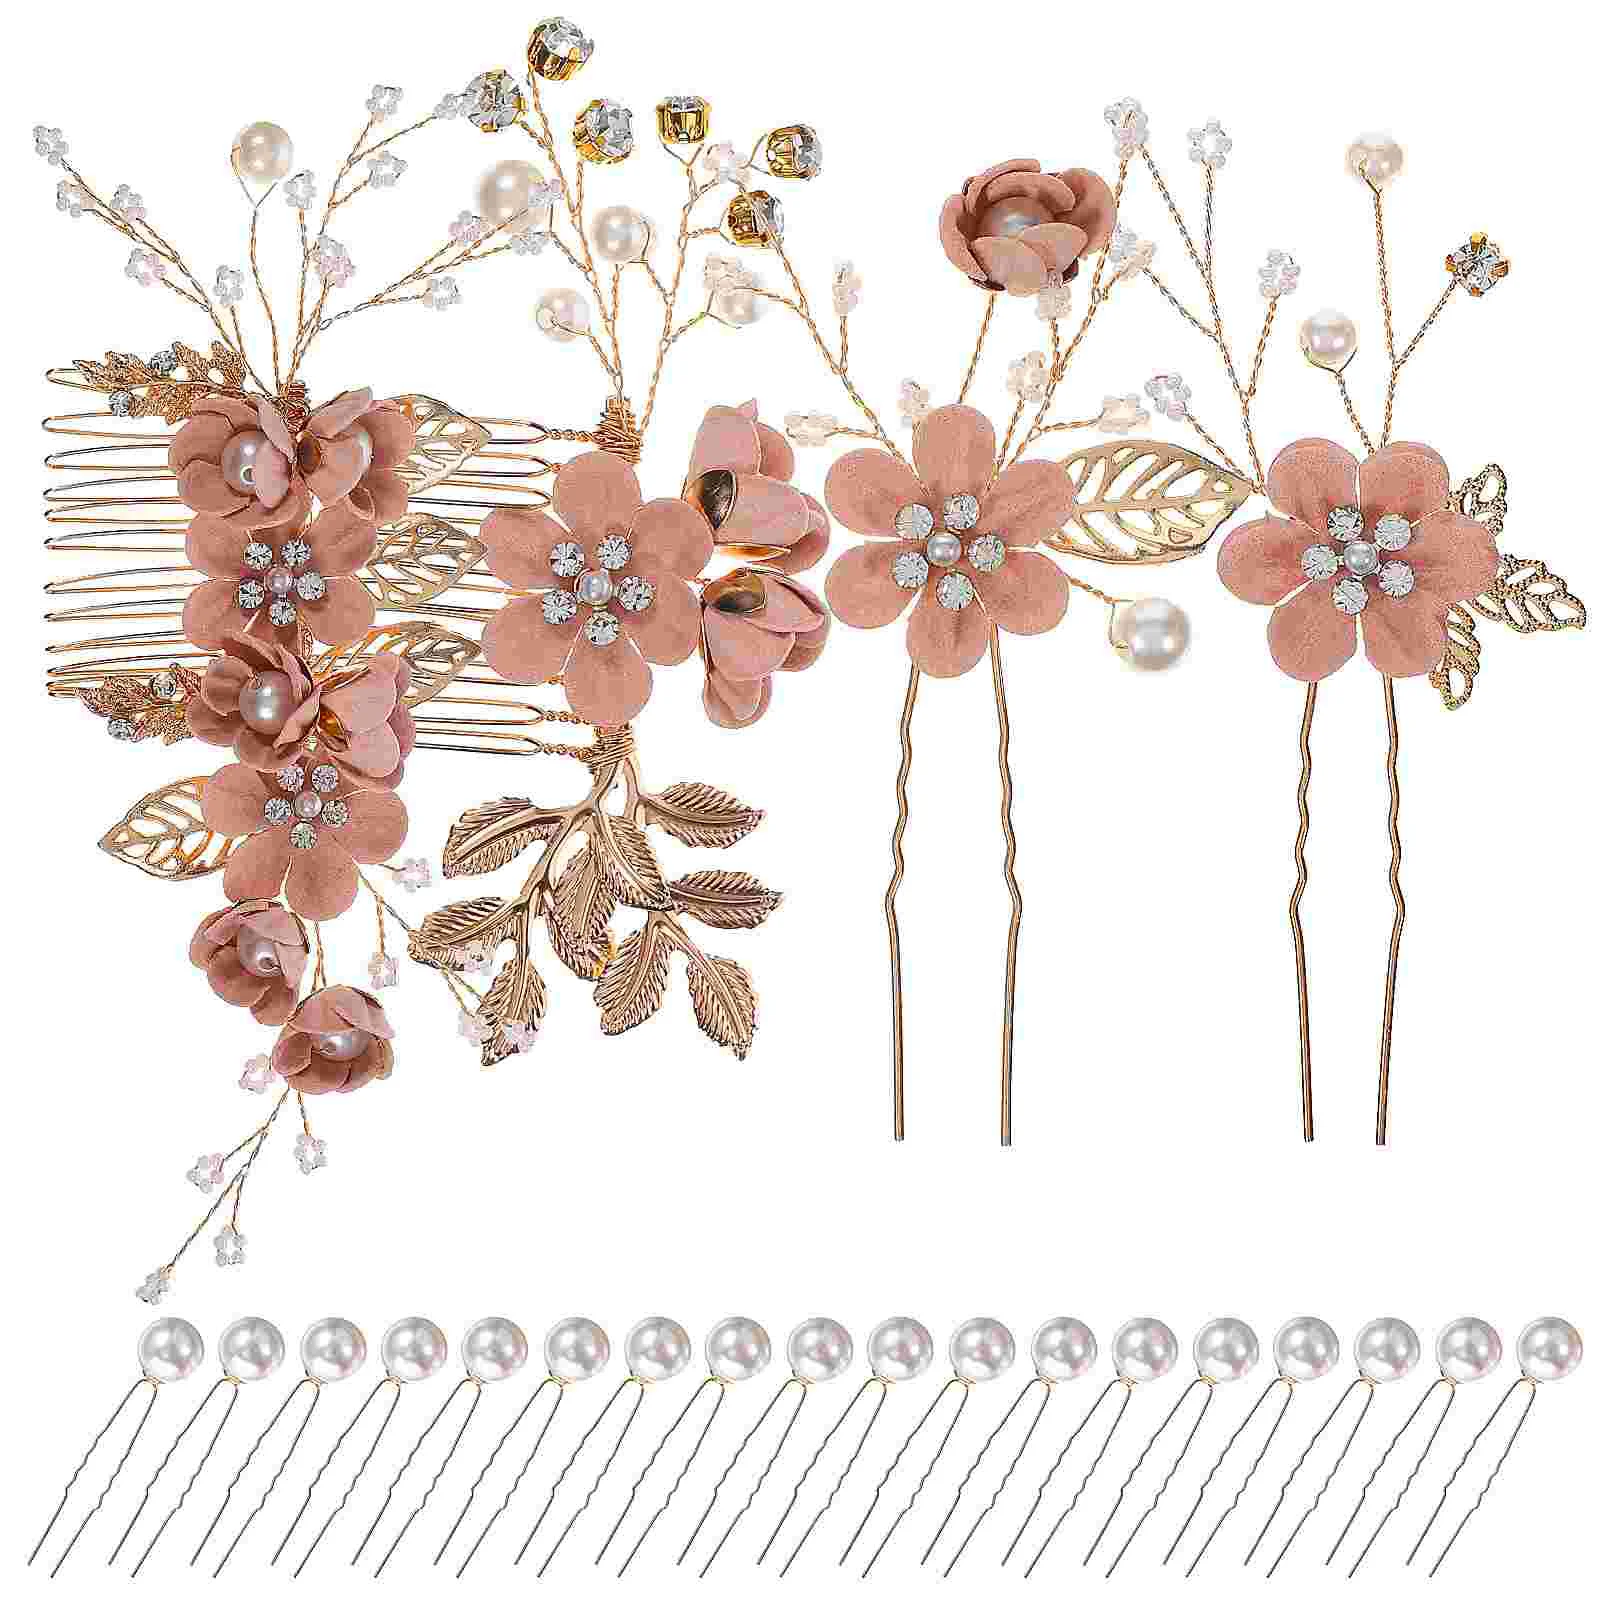 

22Pcs/Set Pearl Flower Leaf Hair Side Comb Clips with U-shaped Hair Pins Headpiece for Women